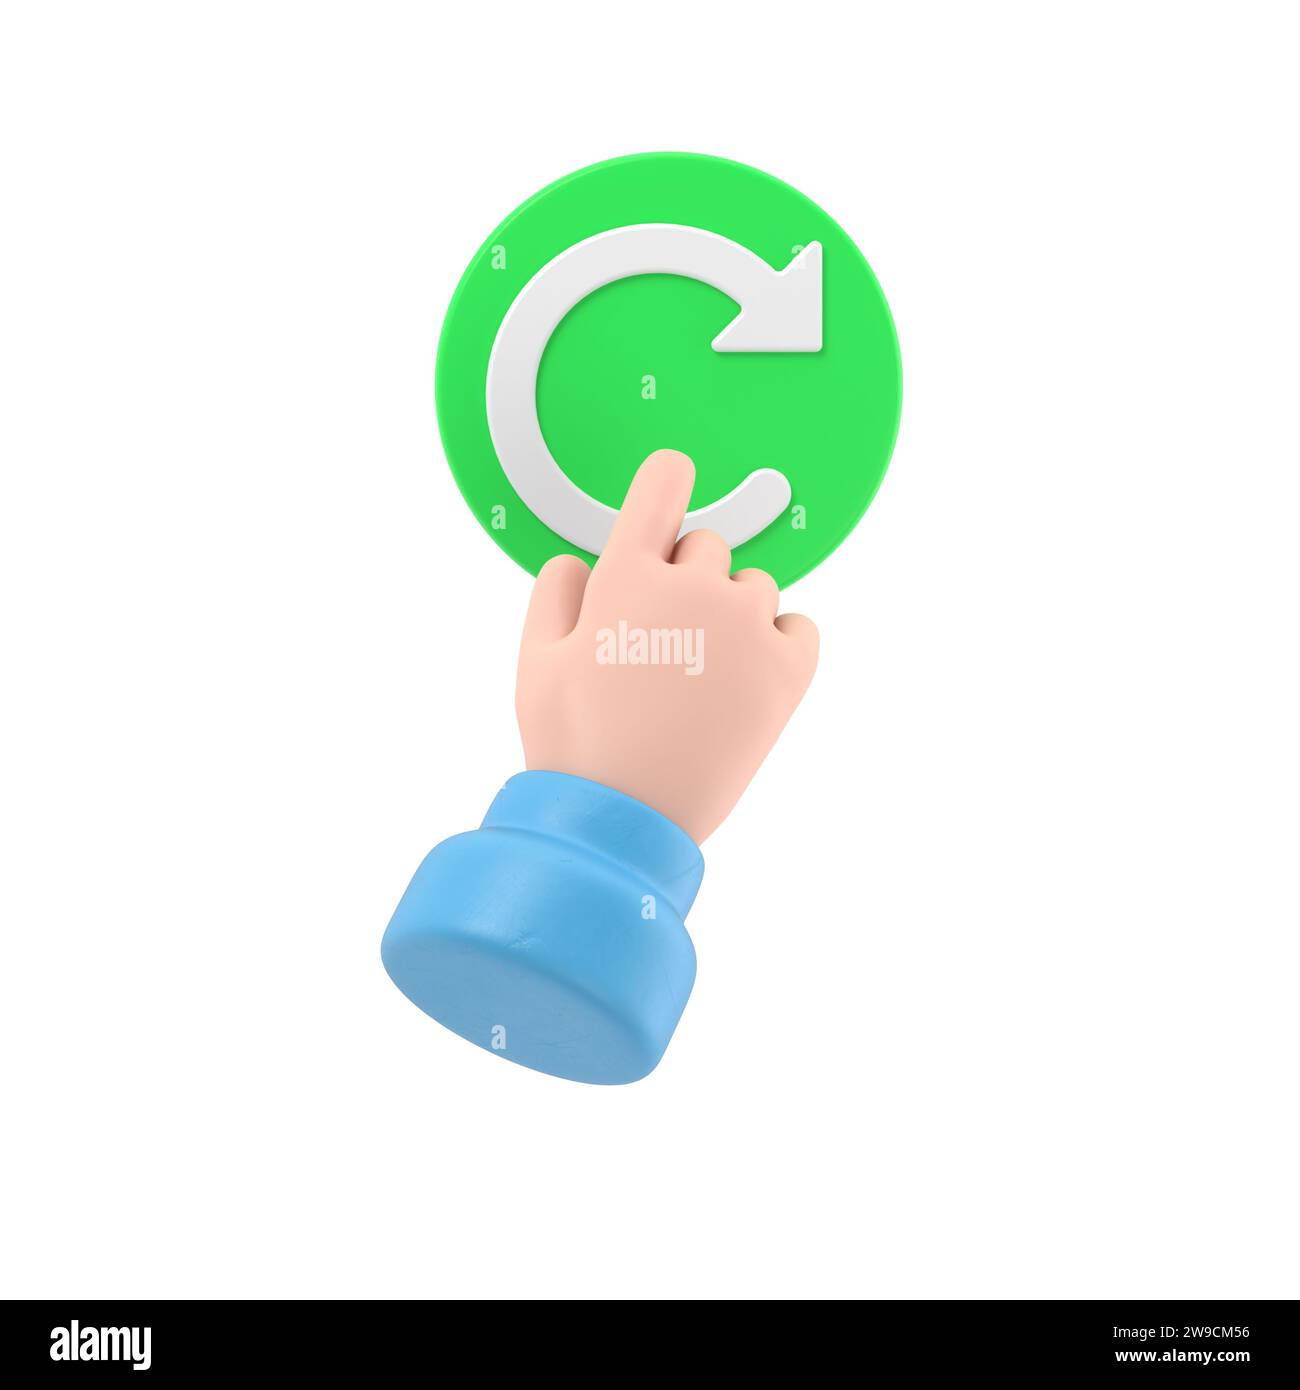 Refresh button Cut Out Stock Images & Pictures - Alamy